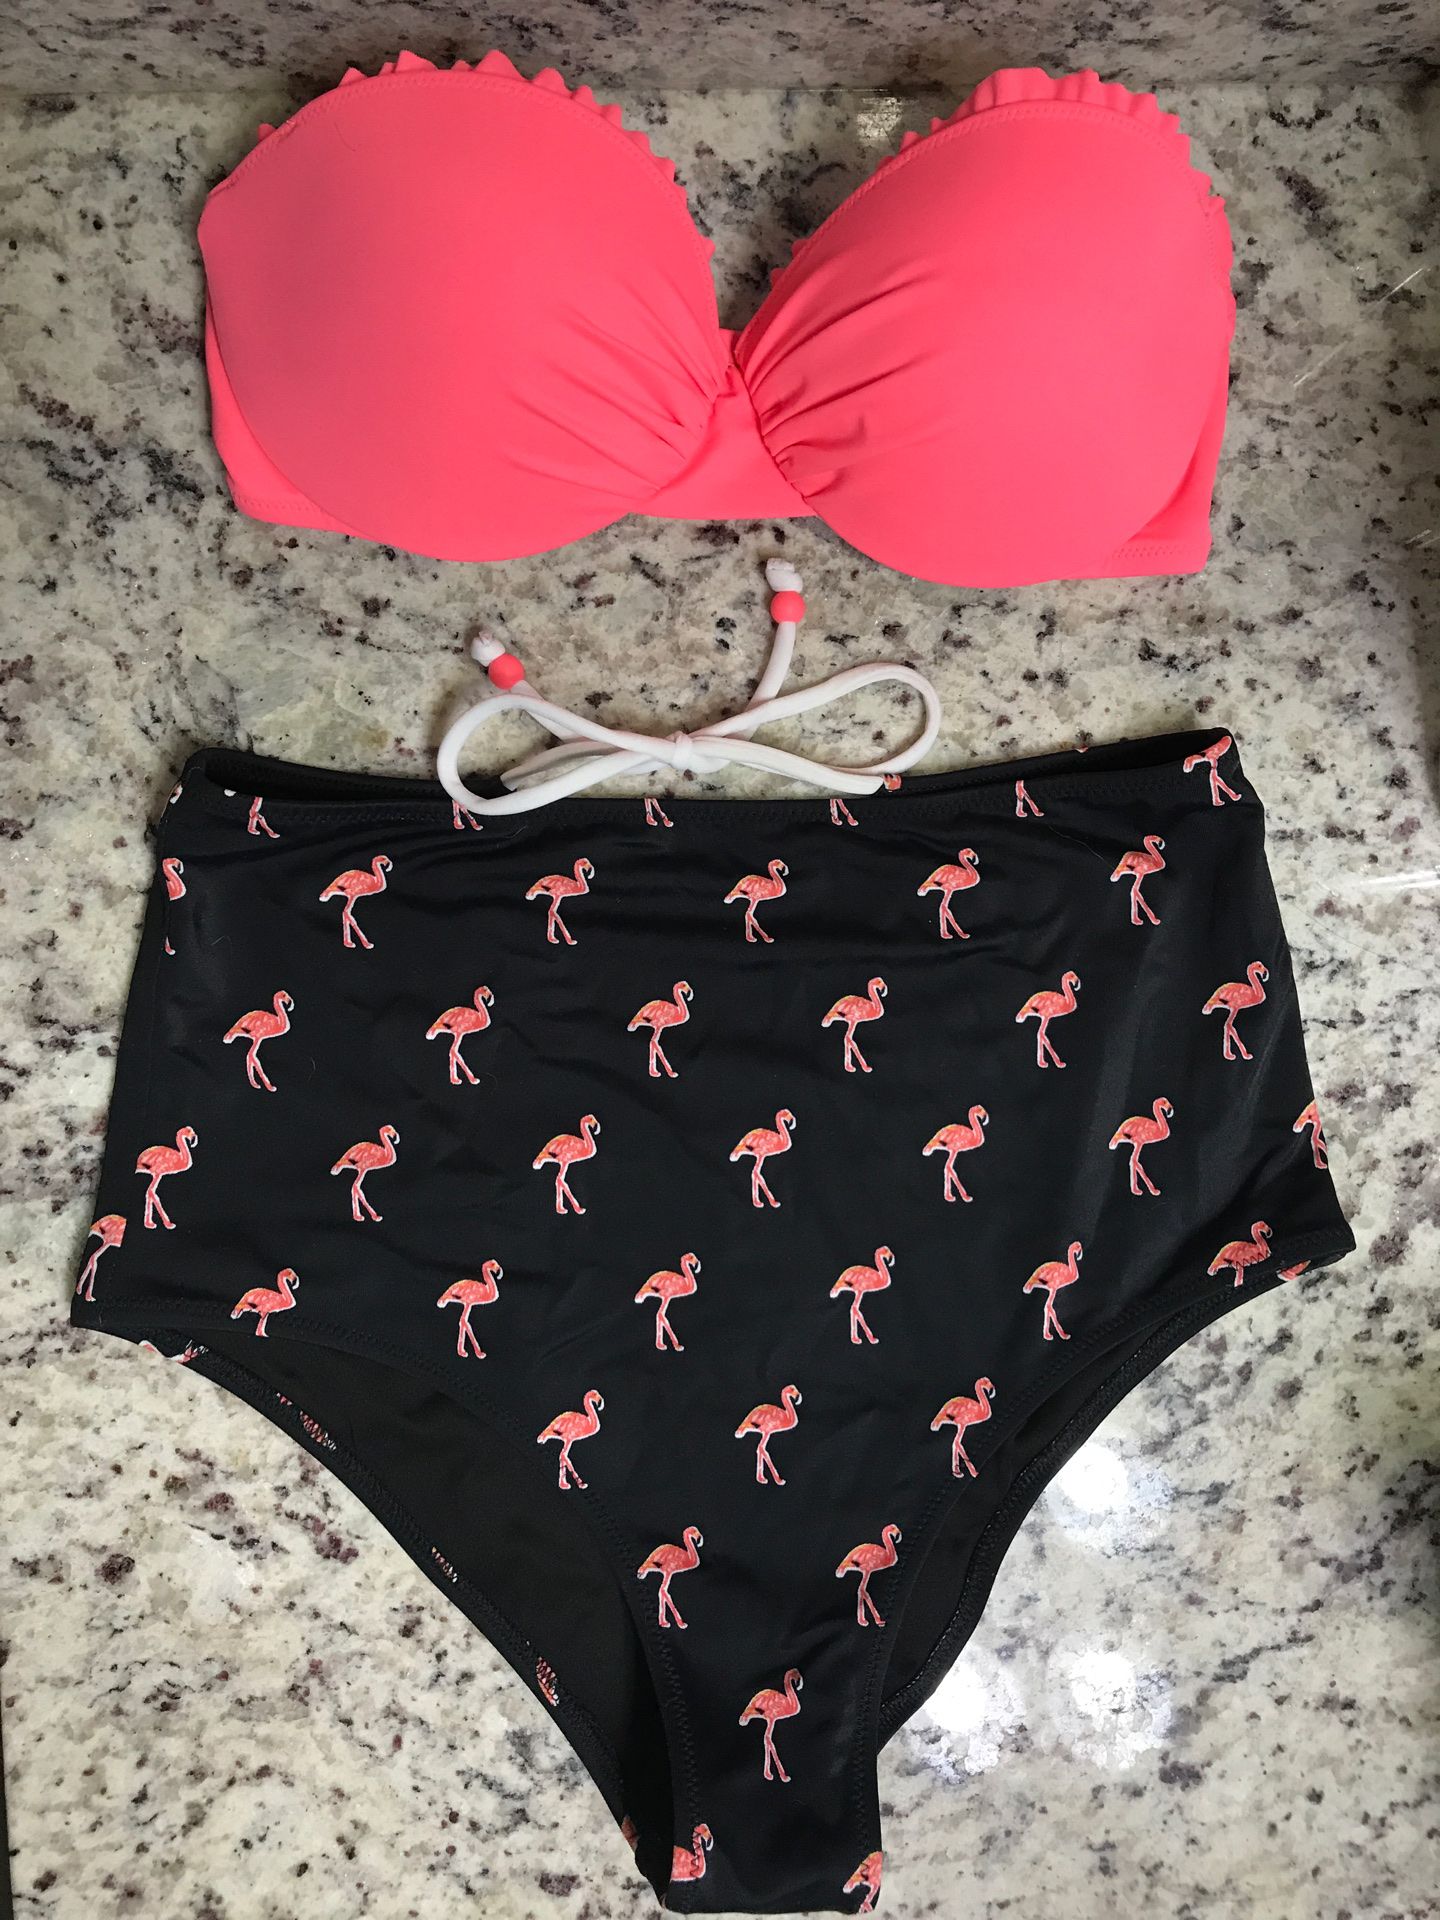 Victoria’s Secret 2 pc Swimsuit w/ Strap or Strapless, High Waisted Bottoms